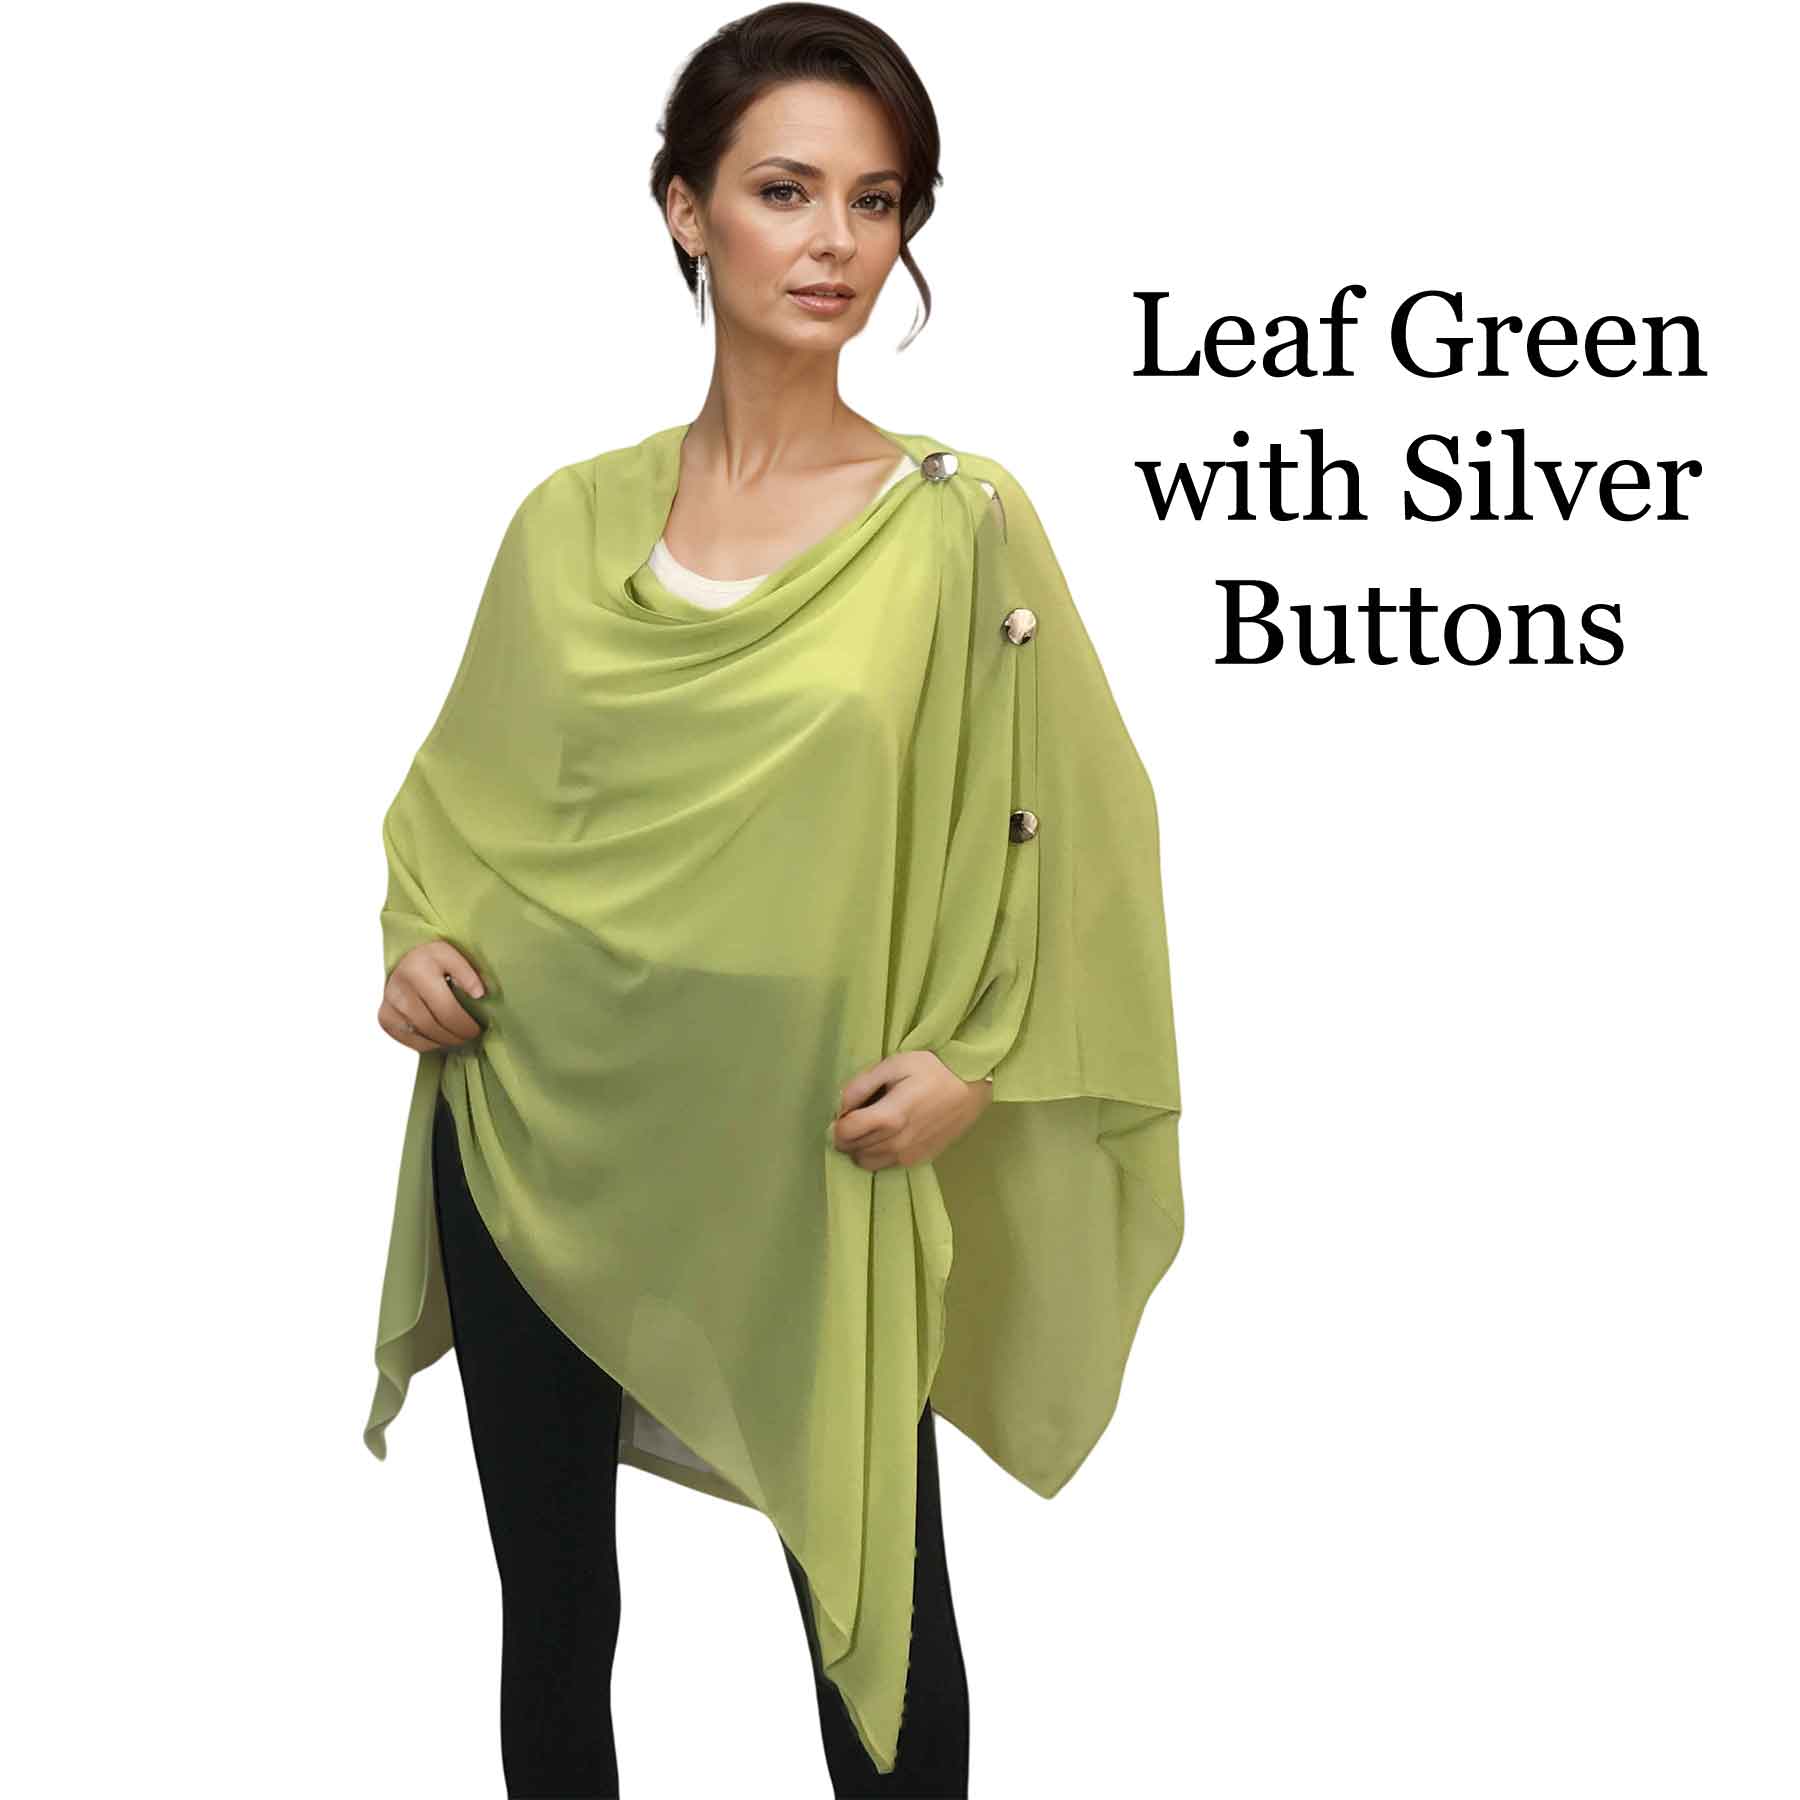 068S - Leaf Green w/Silver Buttons<br>
Georgette Button Shawl

